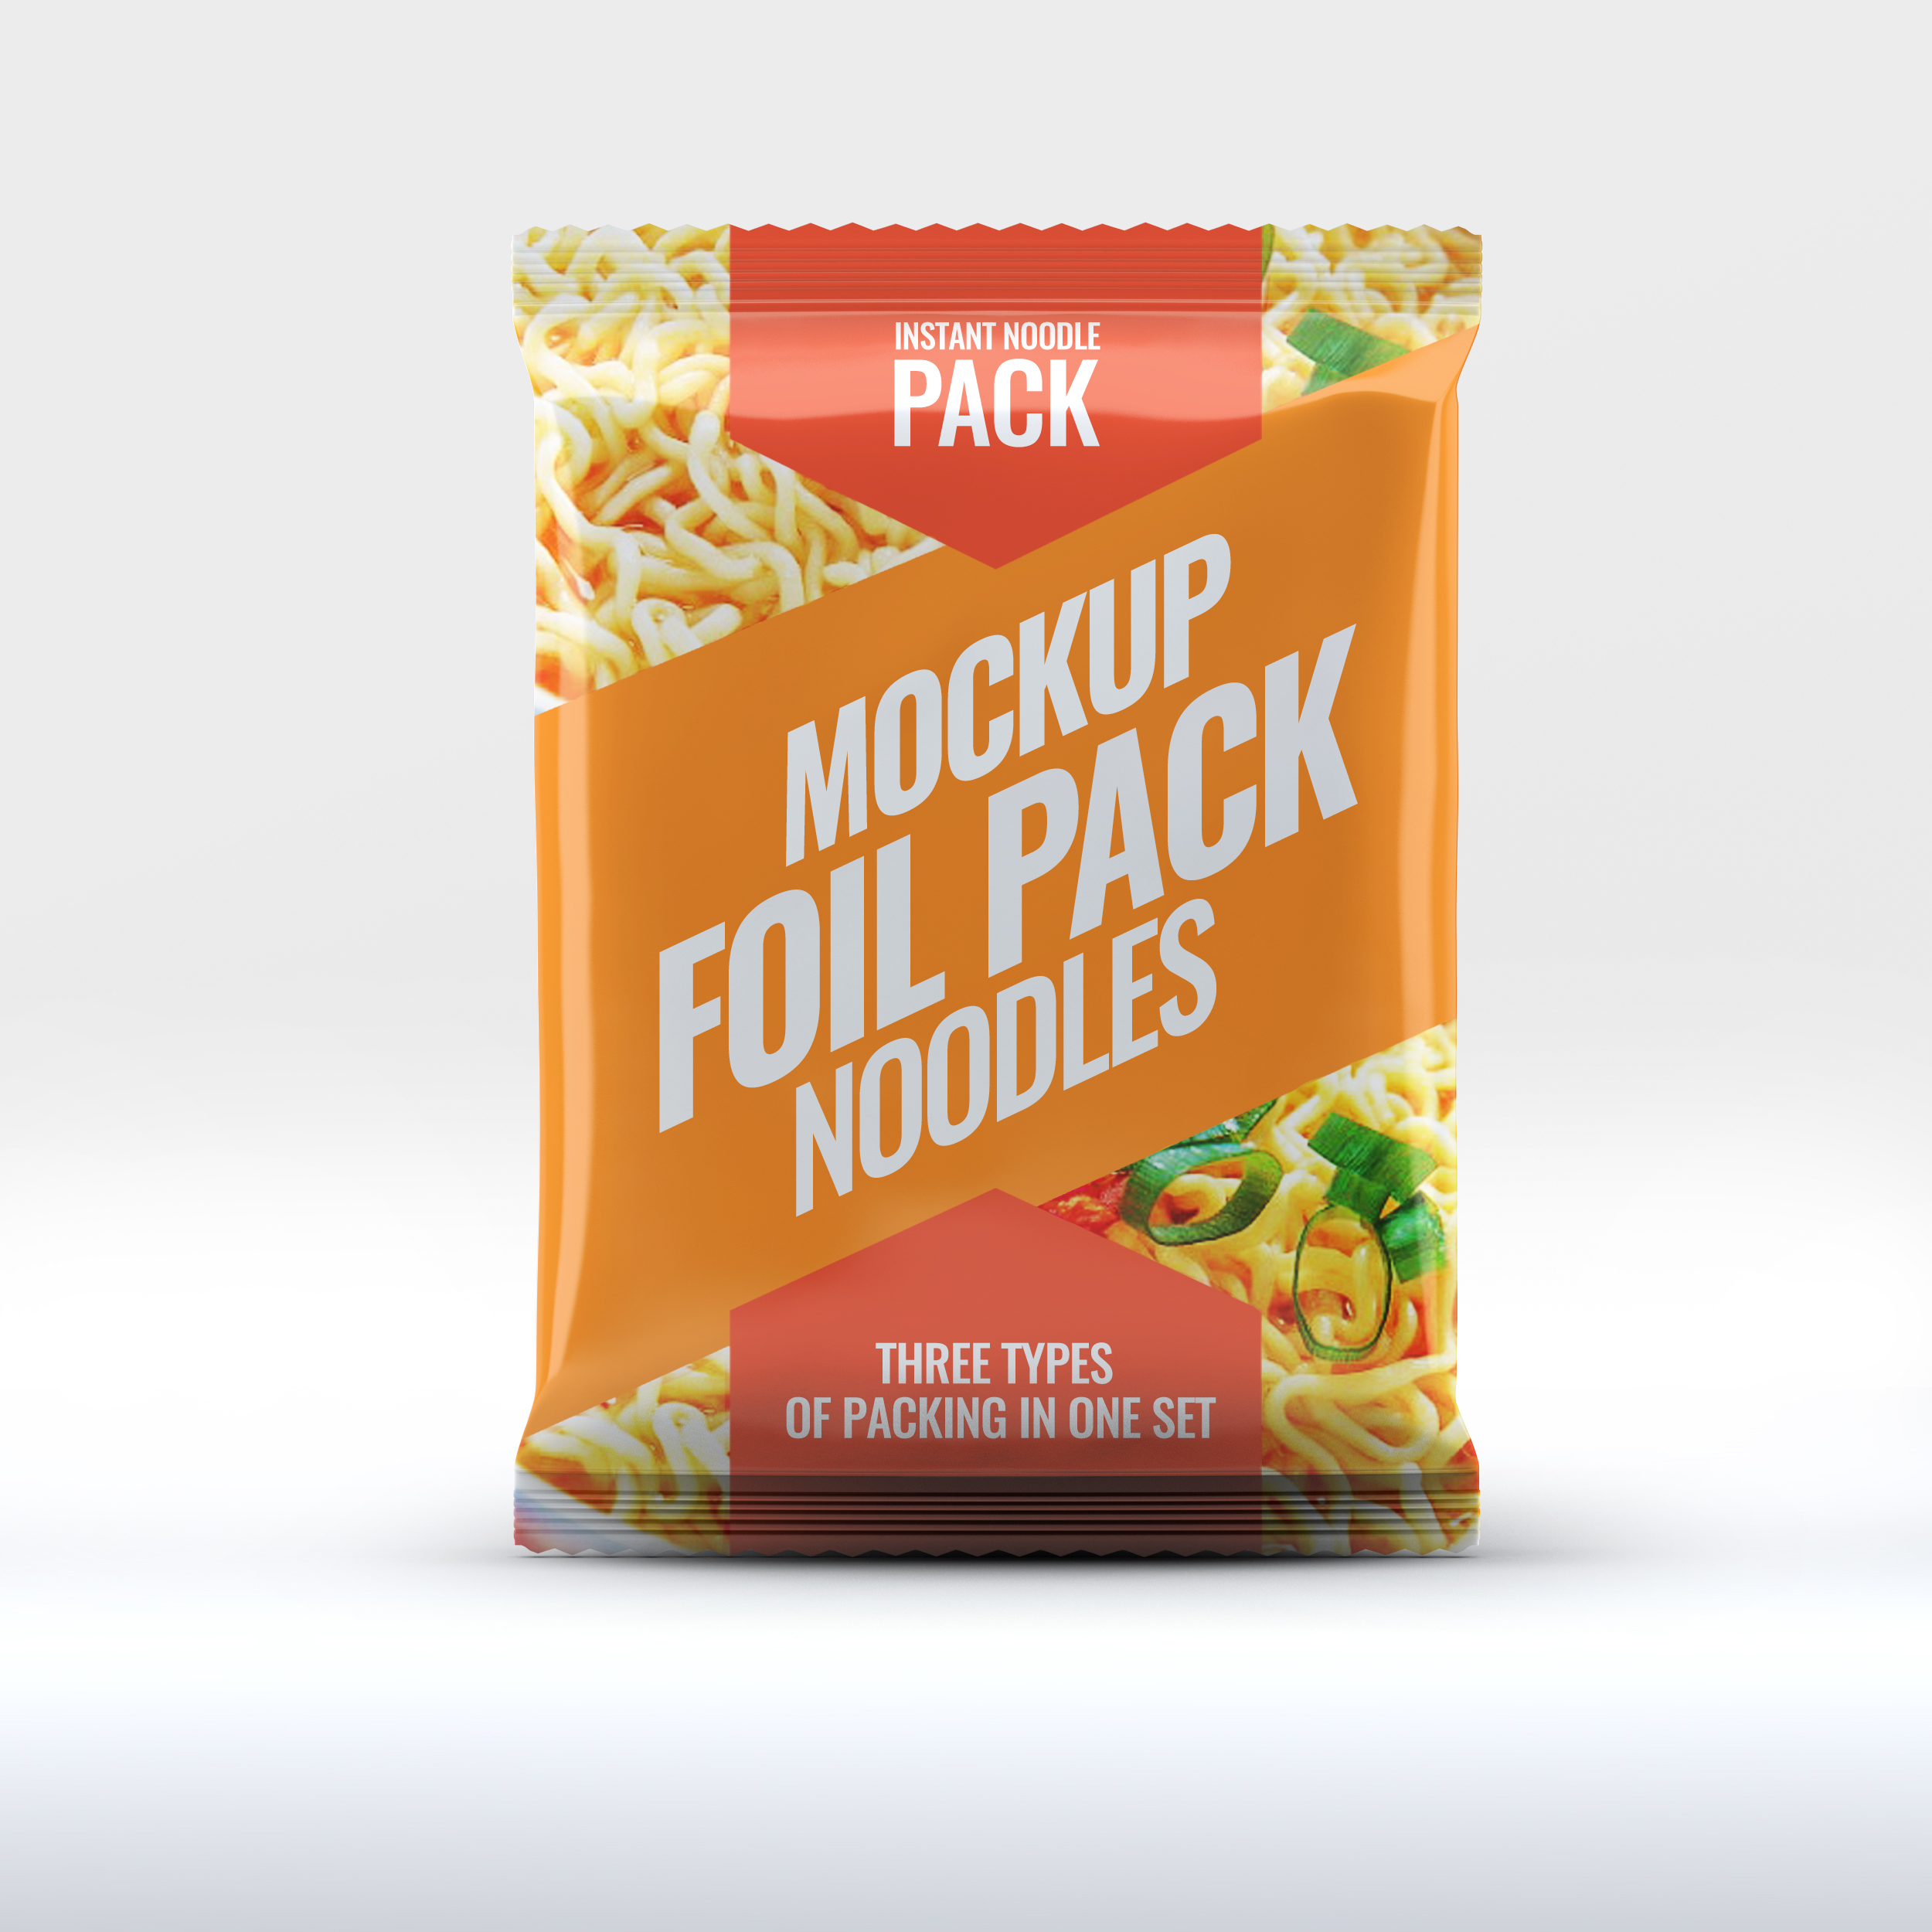 Download product Packaging Design and 3d Mockup 2 for $5 - SEOClerks